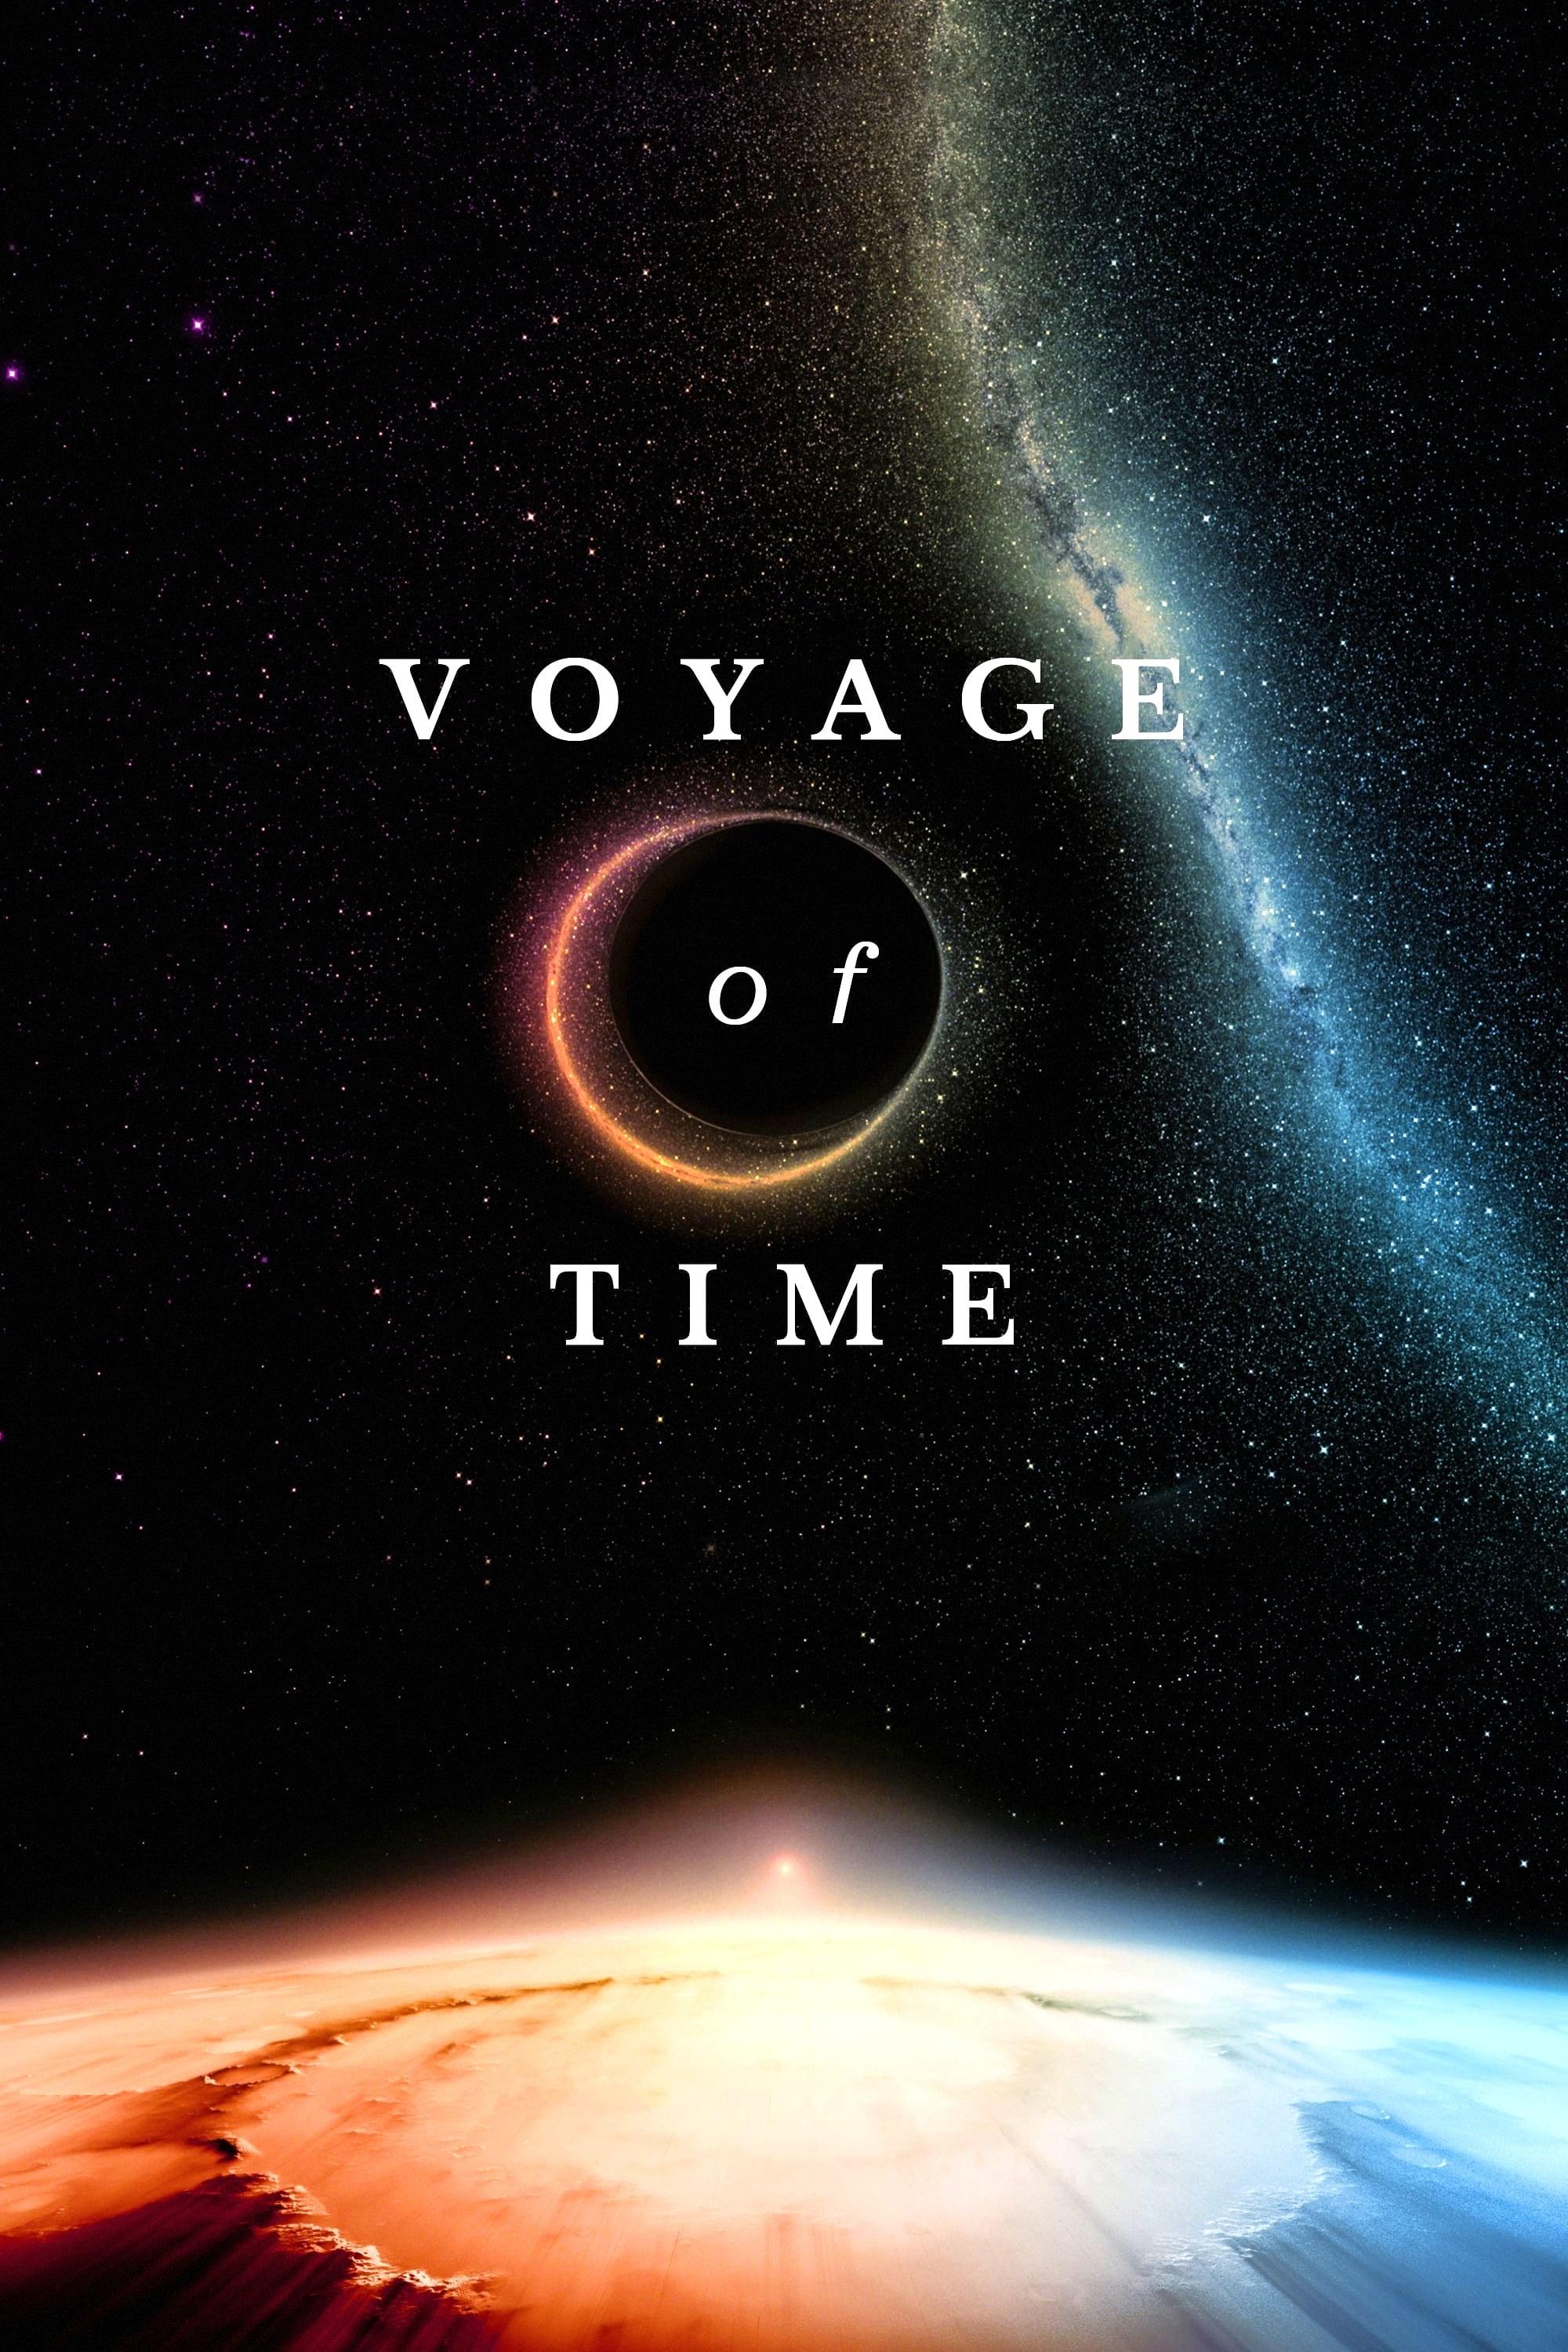 Voyage of Time: Life's Journey poster